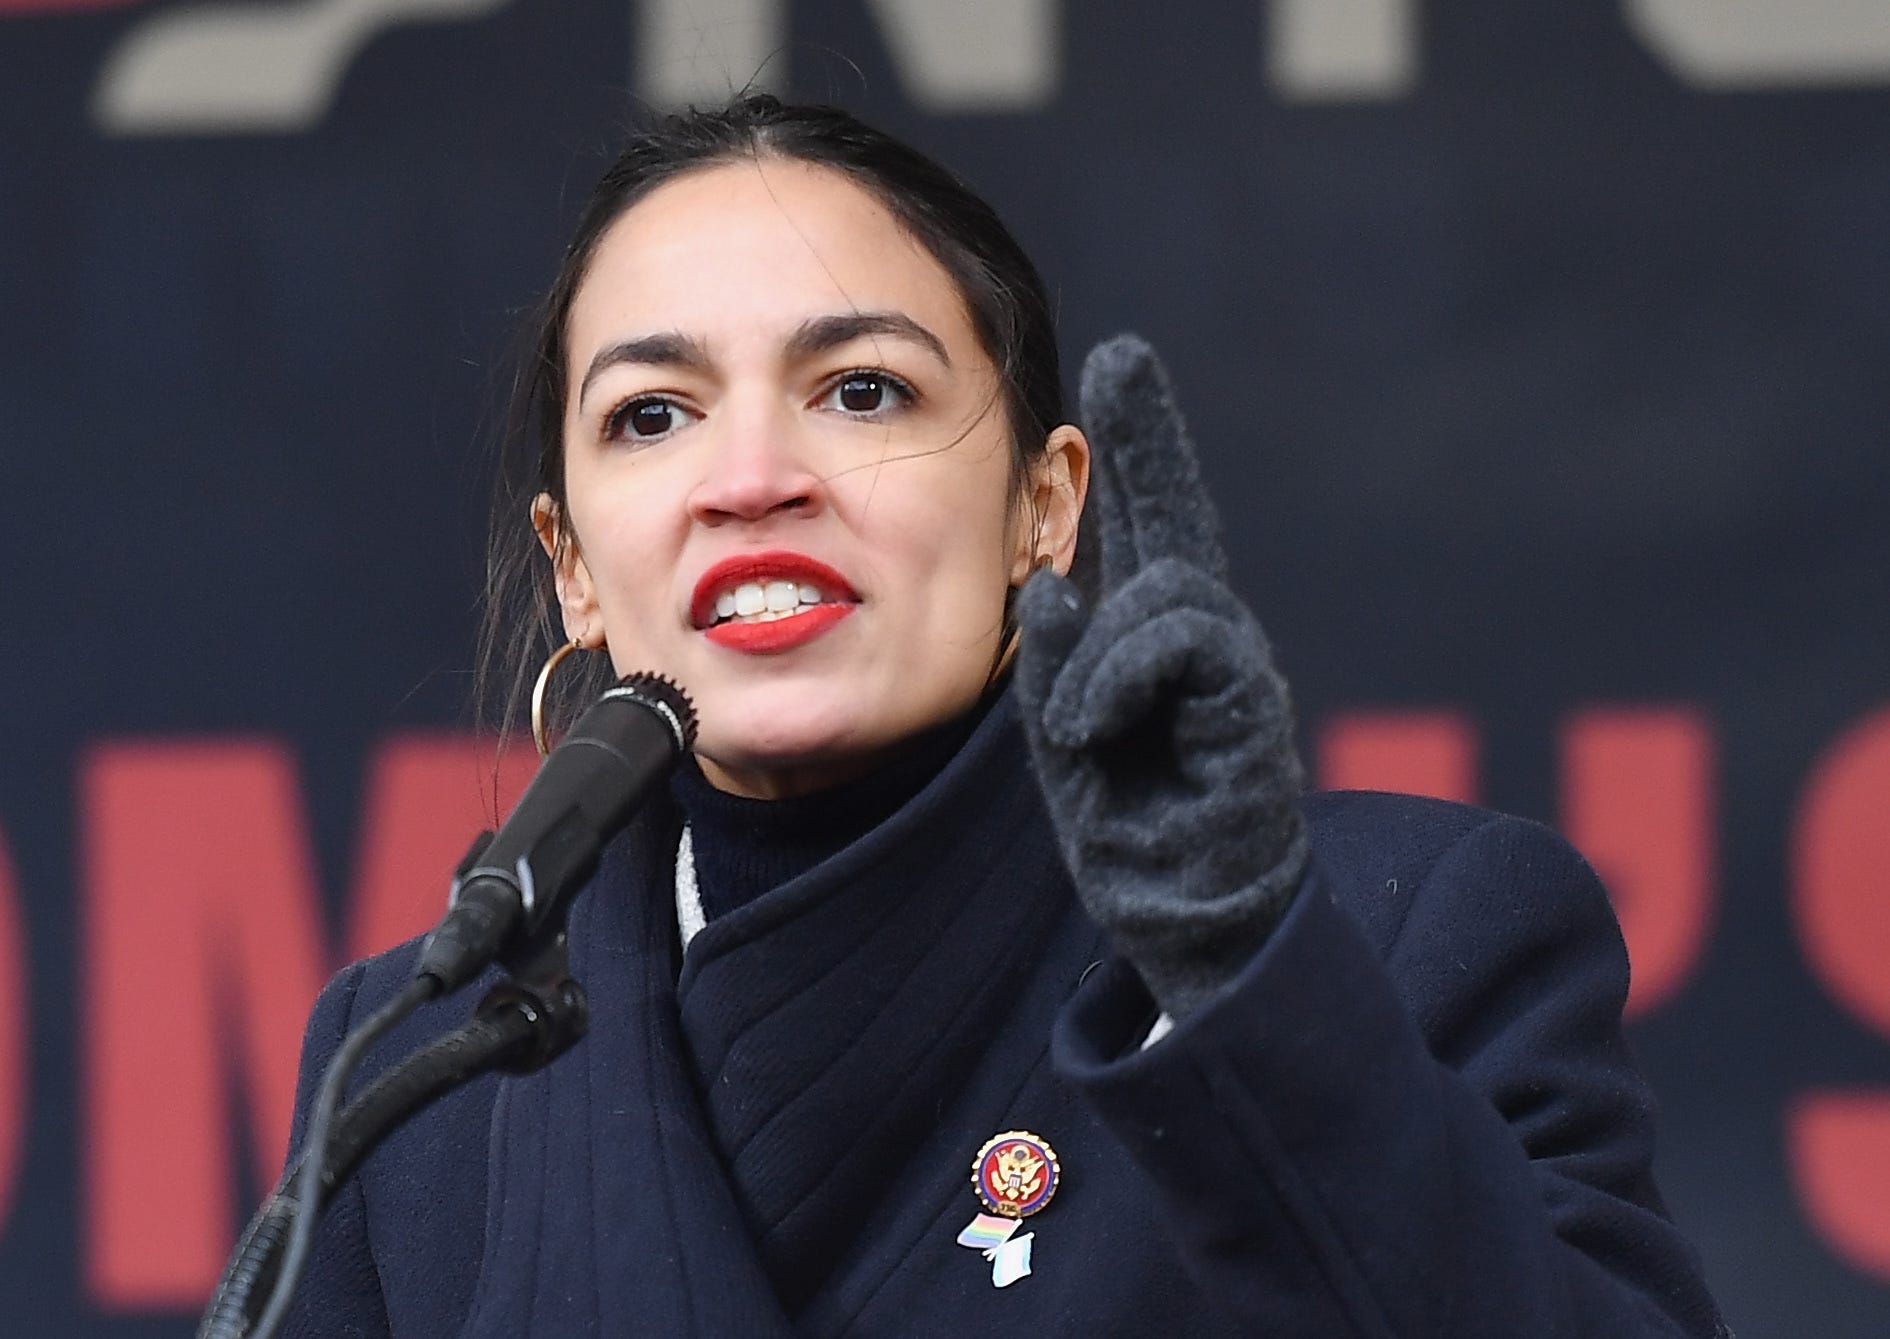 US Representative Alexandria Ocasio-Cortez (D-NY) speaks during the Women's Unity Rally at Foley Square on January 19, 2019 in New York City.